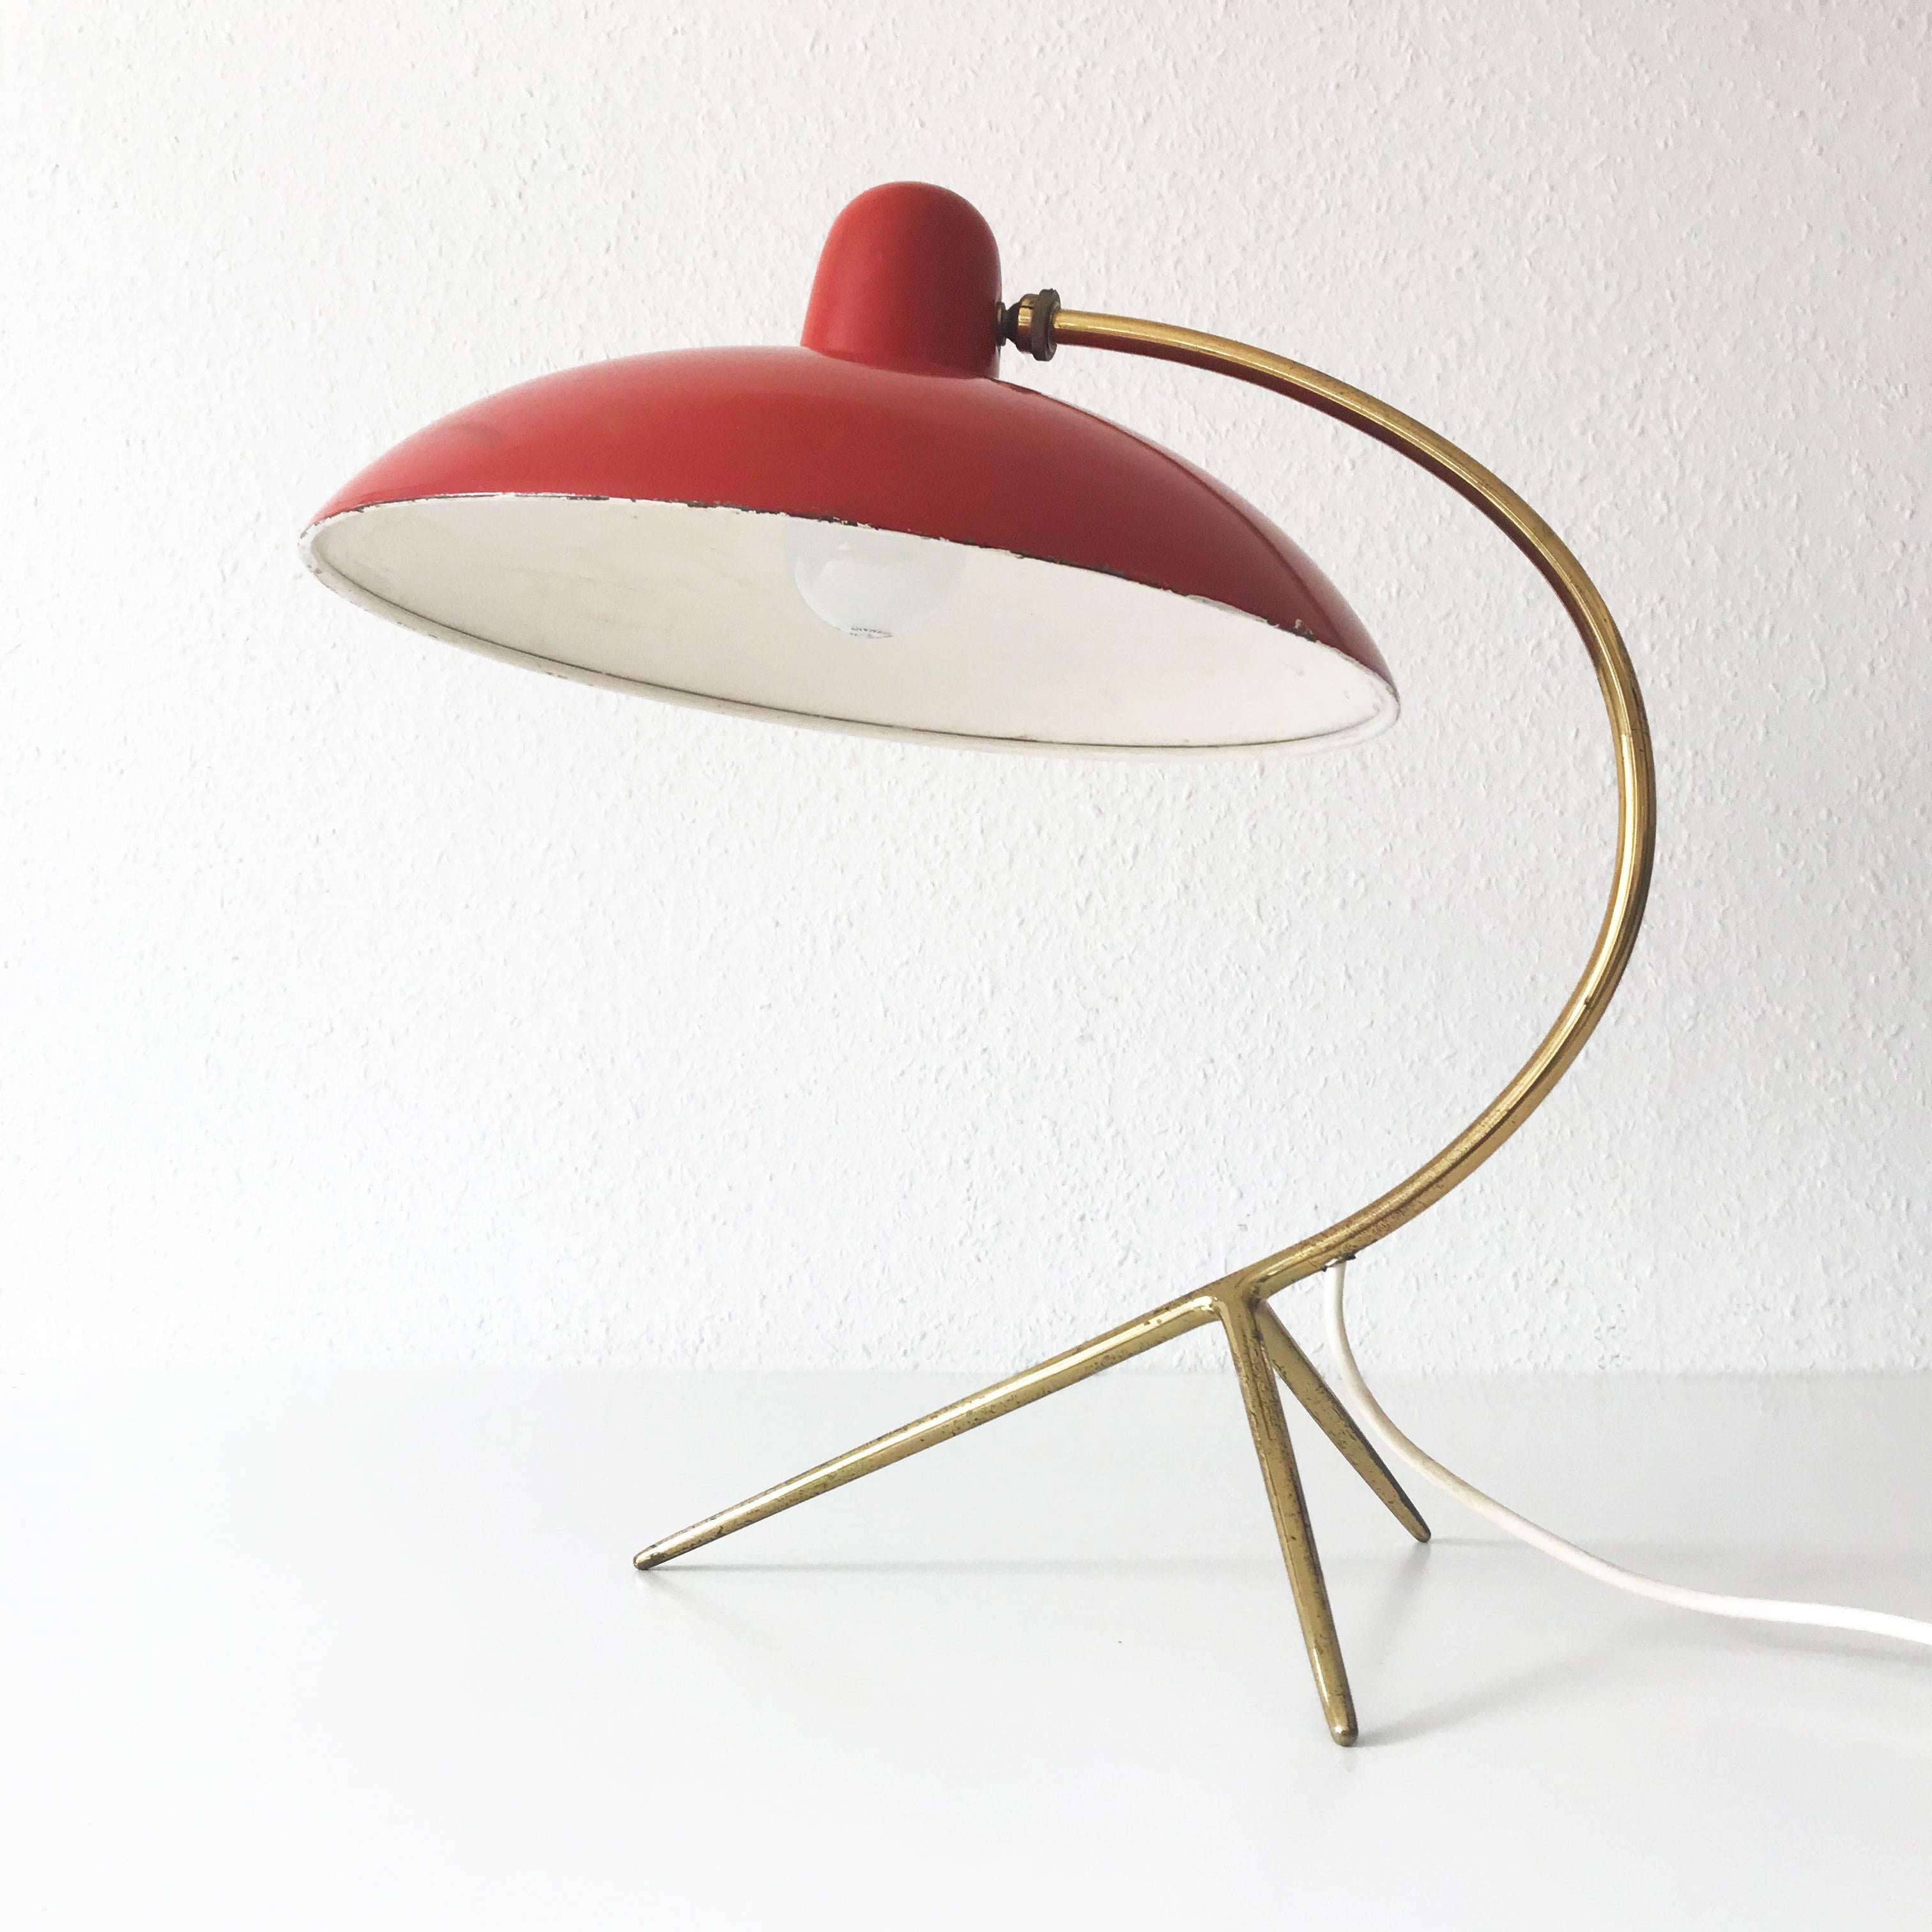 Exceptional Italian Mid-Century Modern Table Lamp, 1950s 1